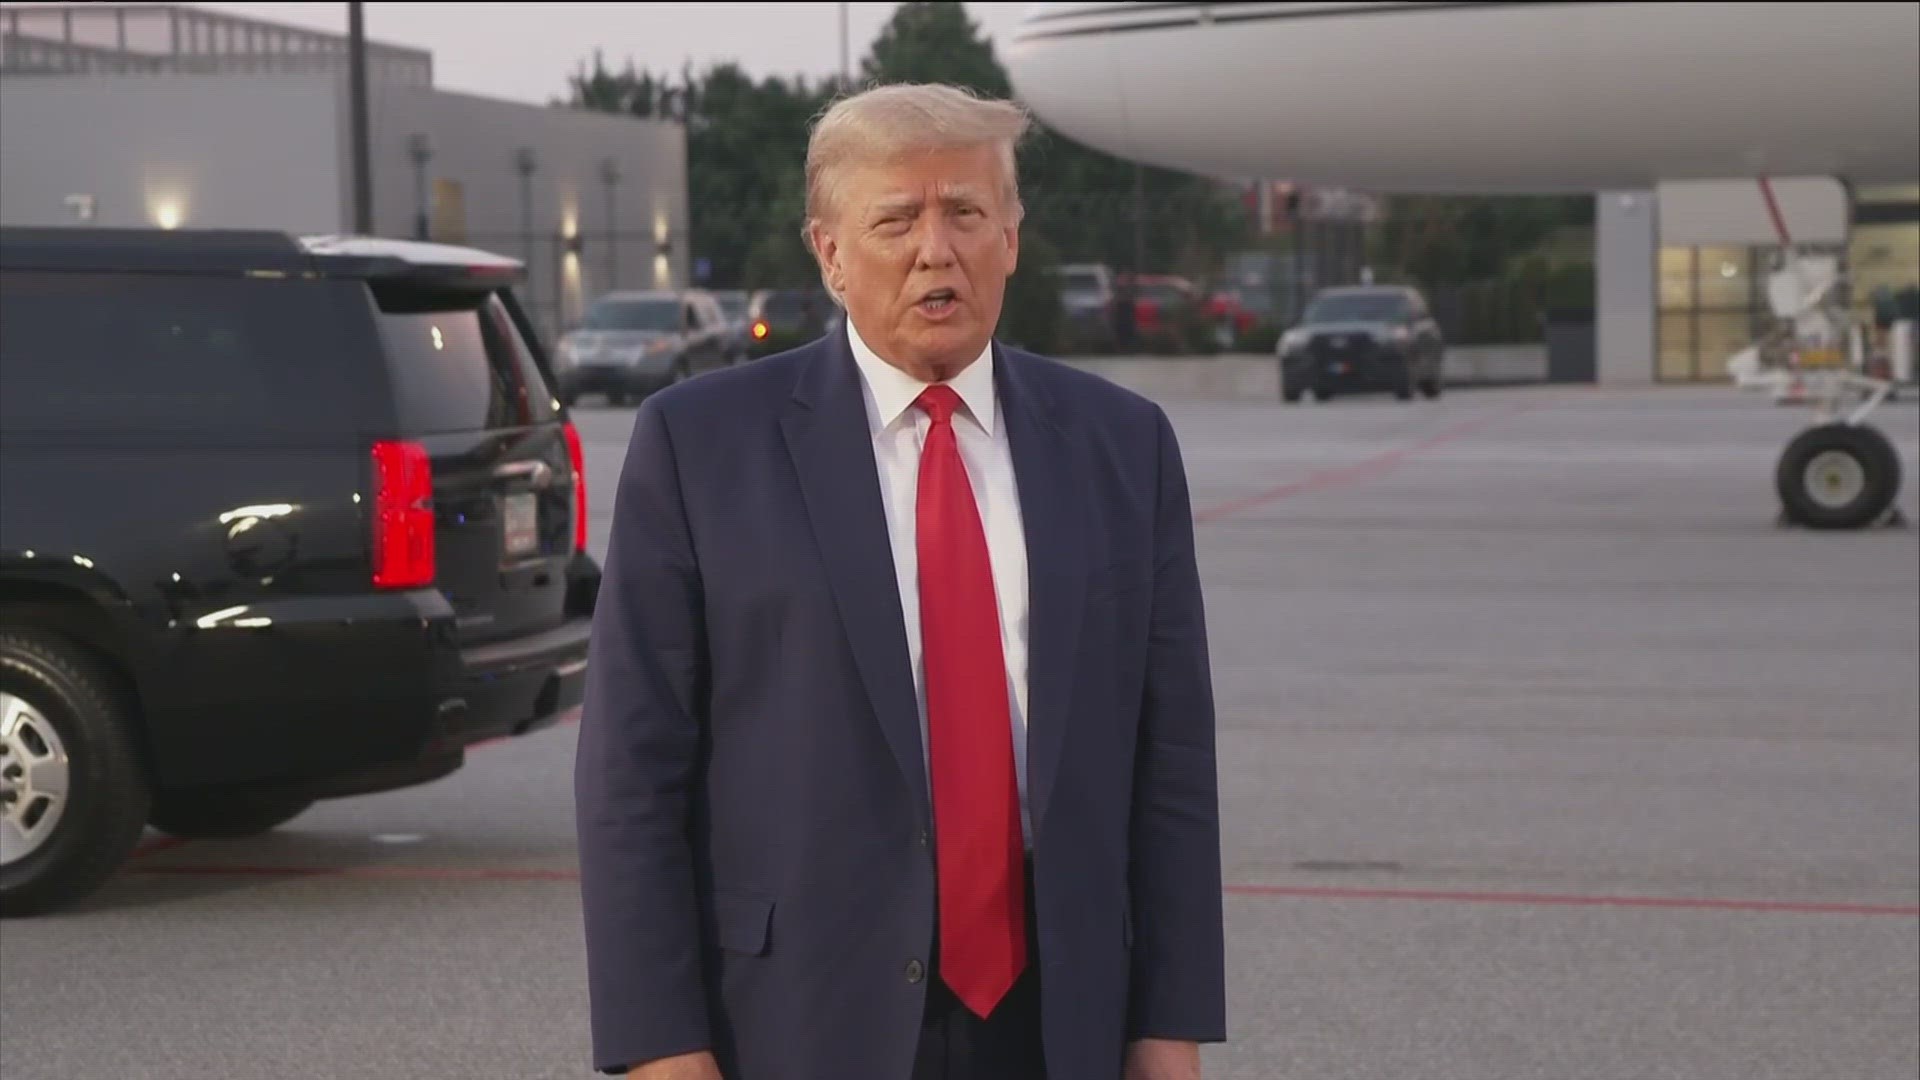 Former President Trump's motorcade returned to Hartsfield-Jackson airport after he was booked in Fulton County Jail. He spoke to the press before boarding his plane.